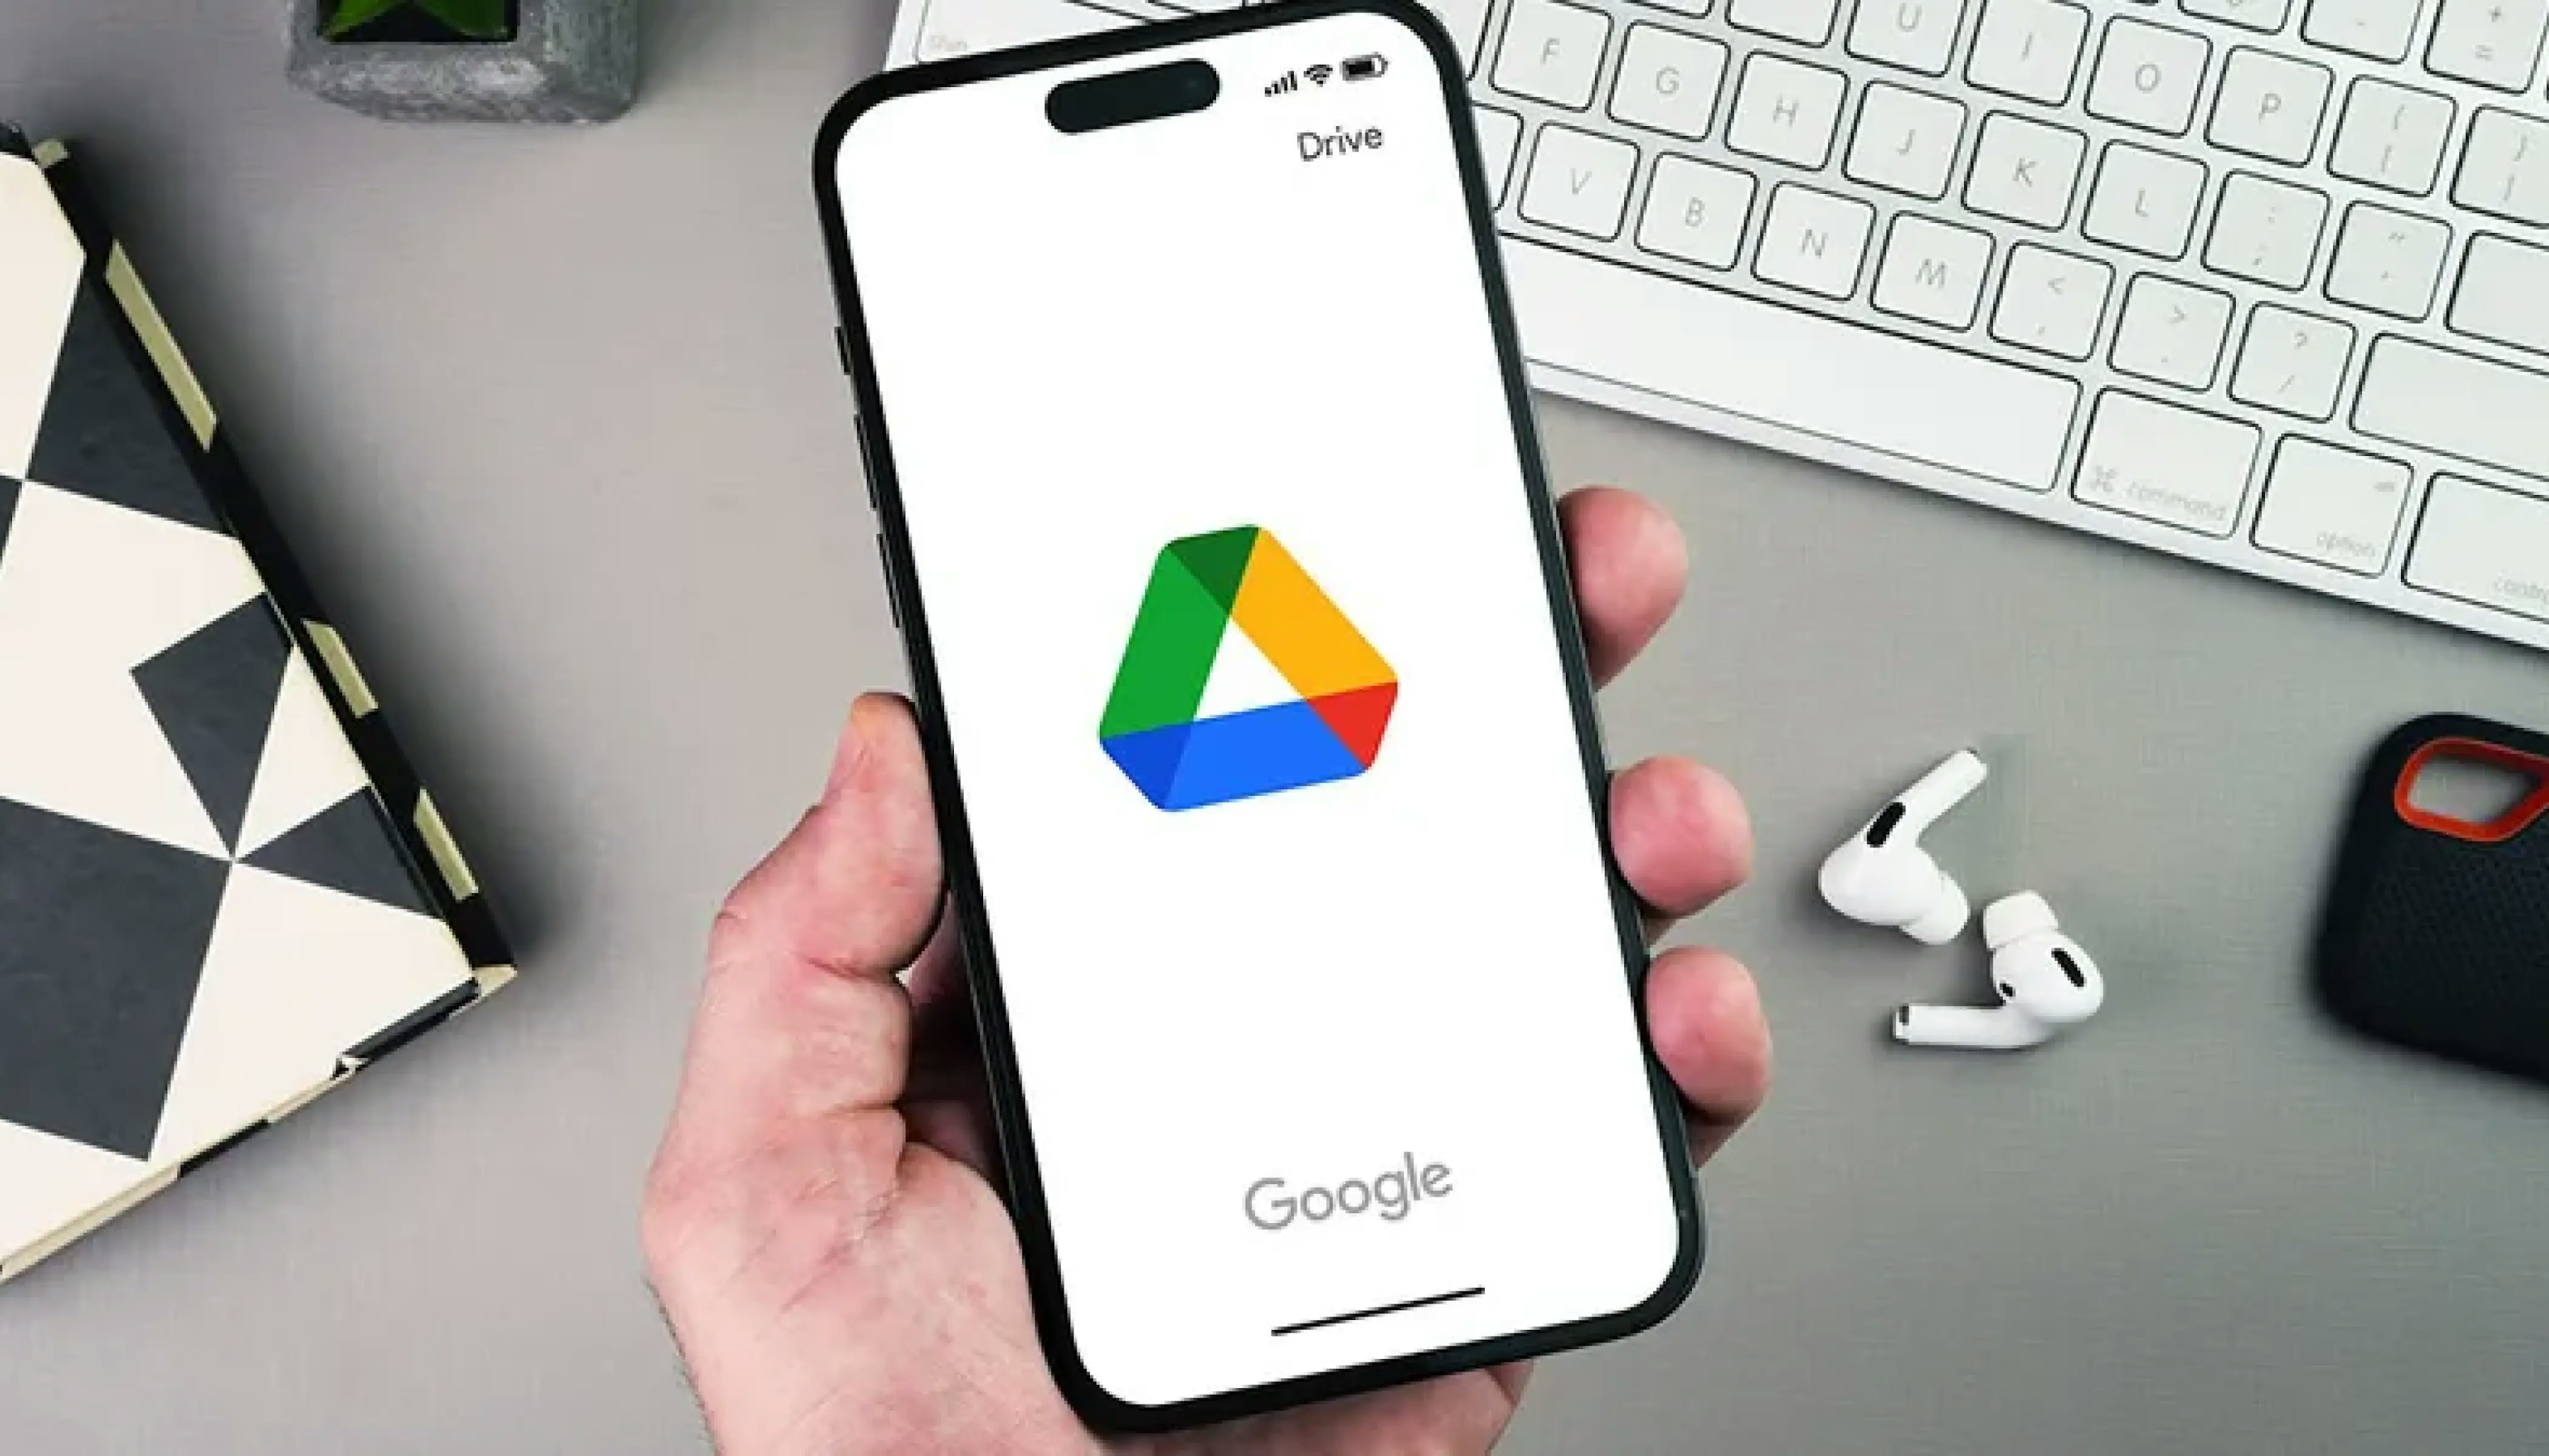 Google Drive on an iPhone being held